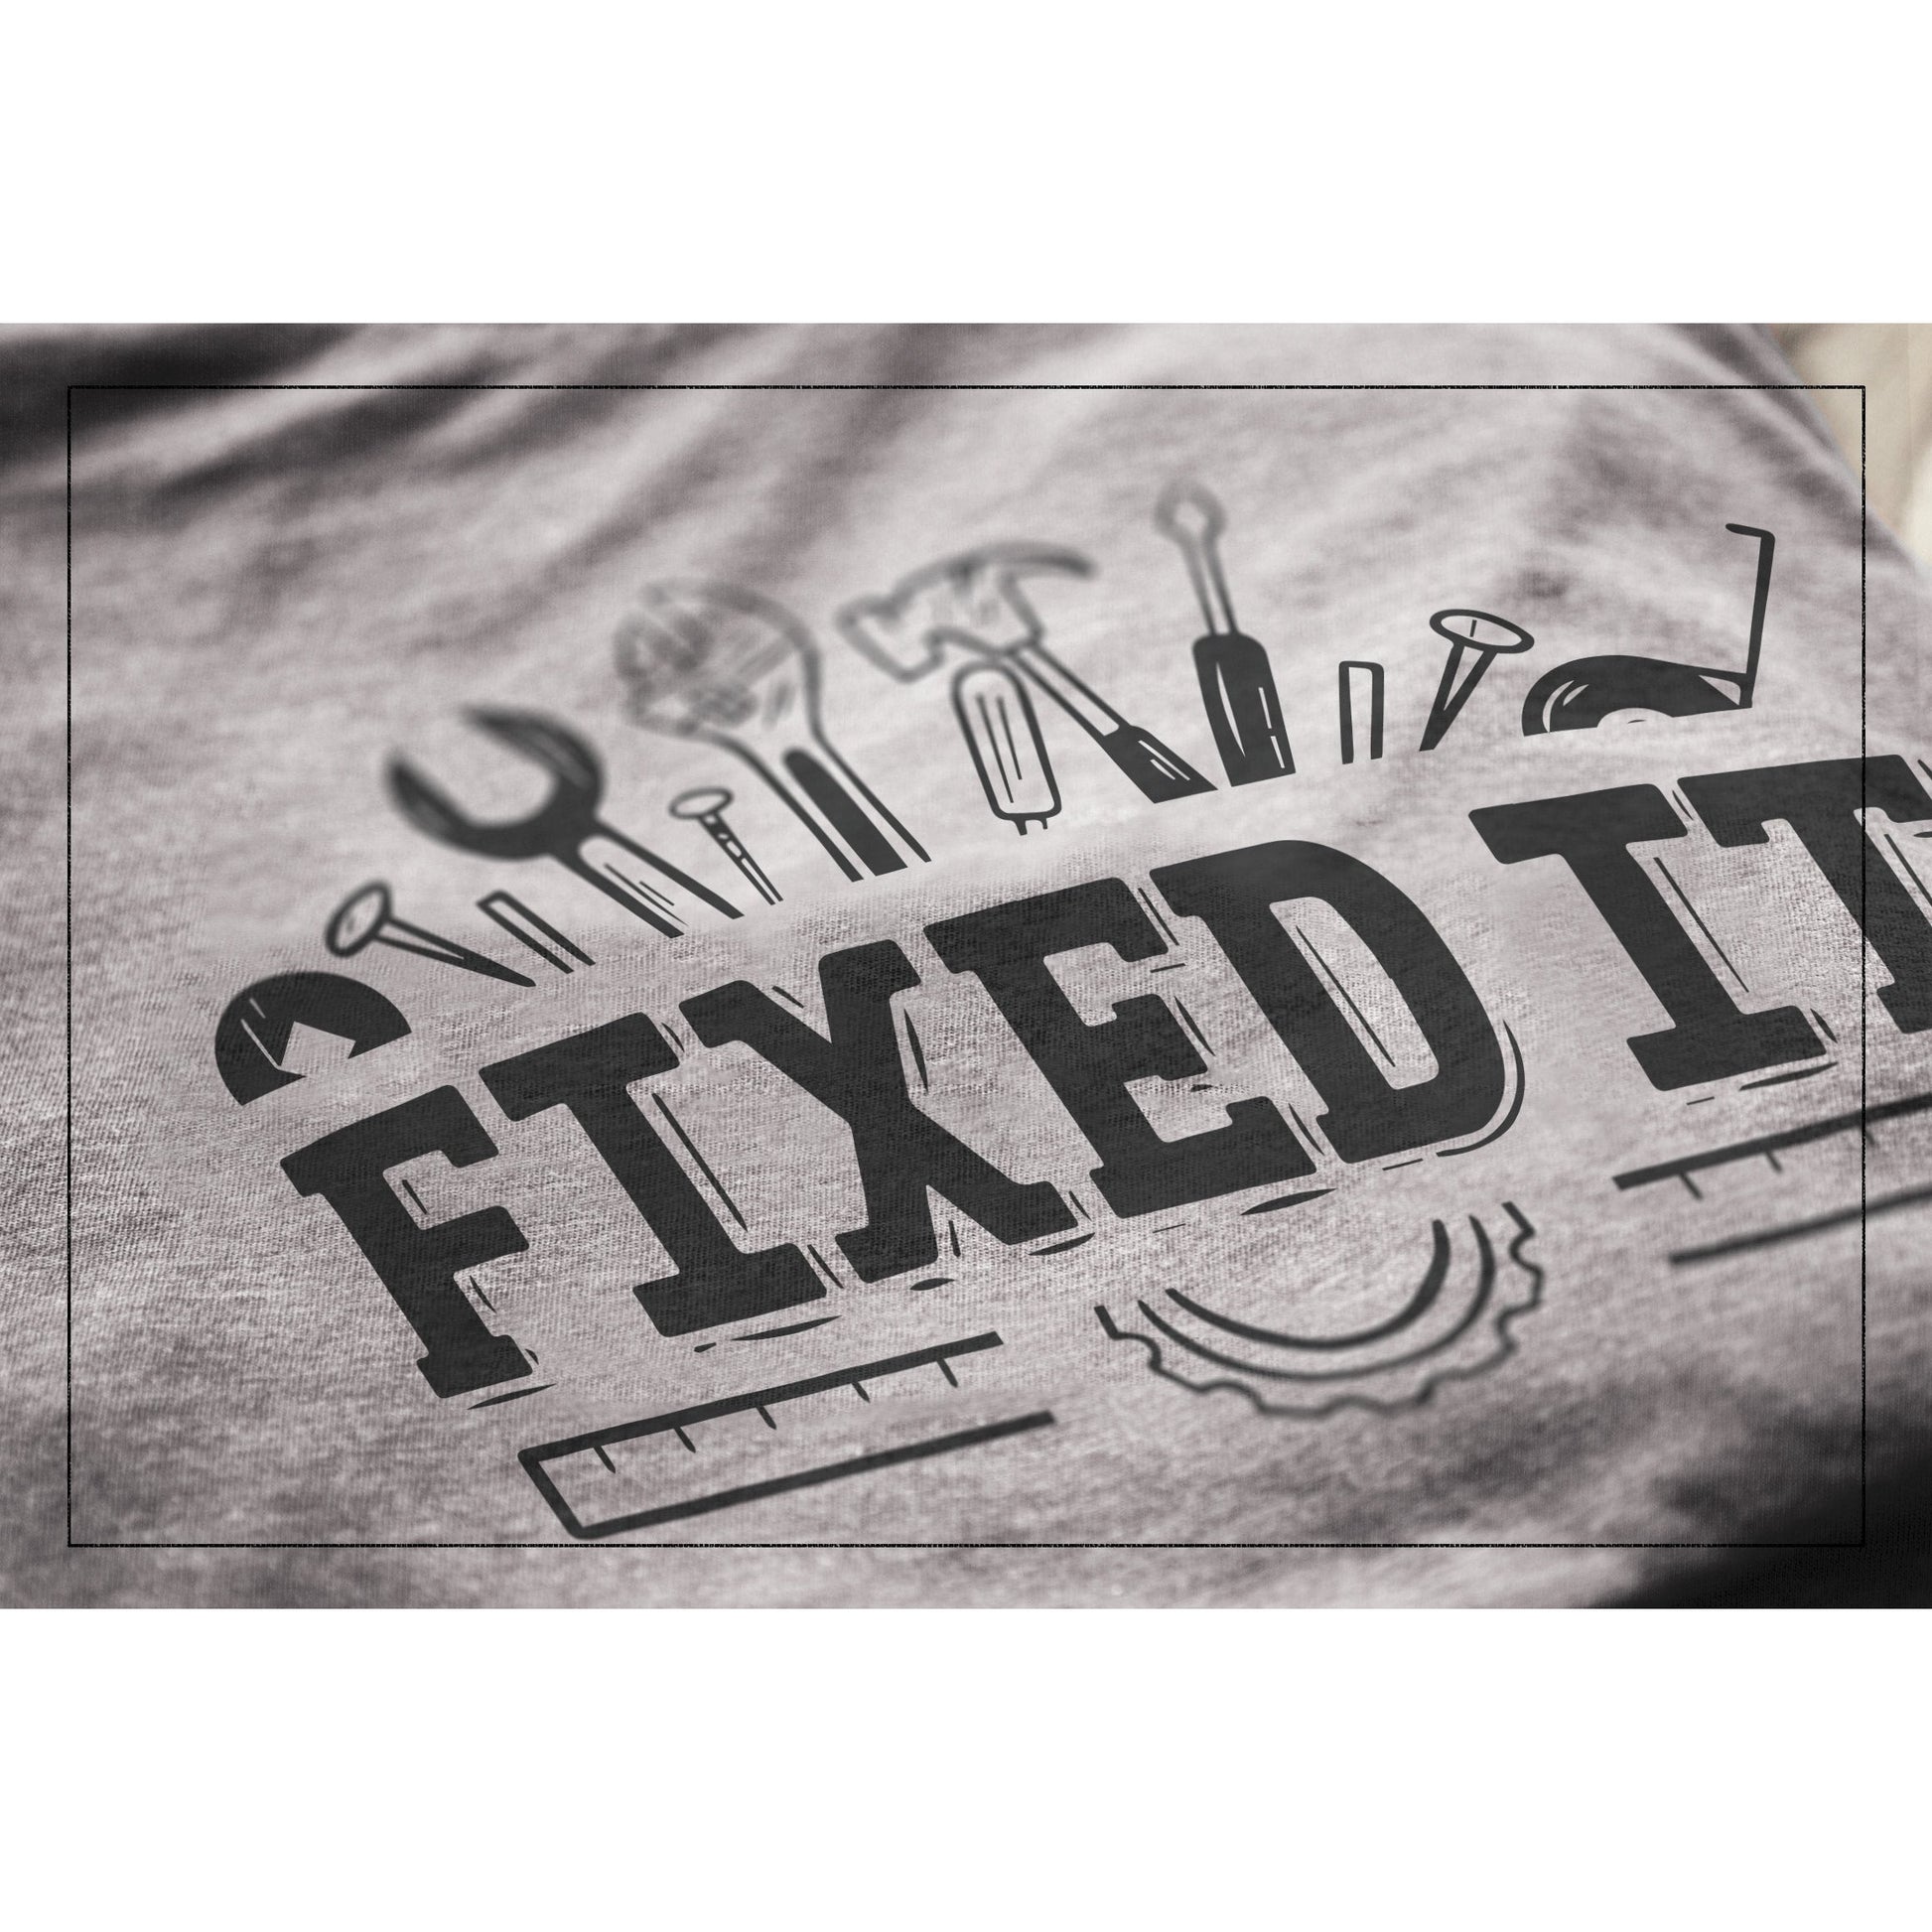 Fixed It Heather Grey Printed Graphic Men's Crew T-Shirt Tee Closeup Details